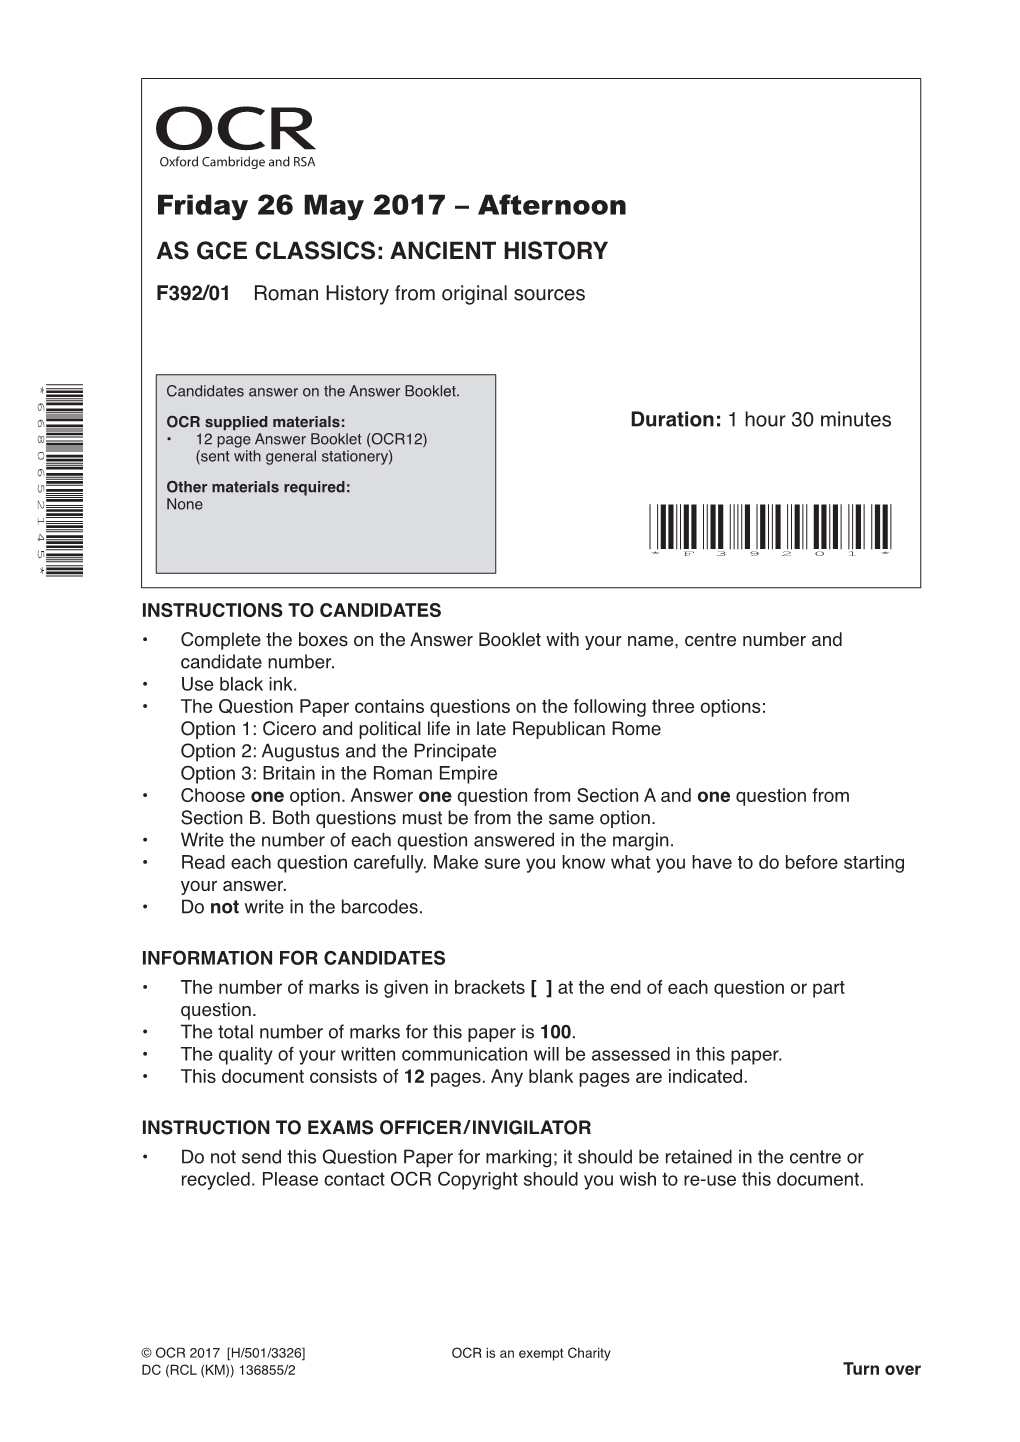 Friday 26 May 2017 – Afternoon AS GCE CLASSICS: ANCIENT HISTORY F392/01 Roman History from Original Sources *6680652145* Candidates Answer on the Answer Booklet